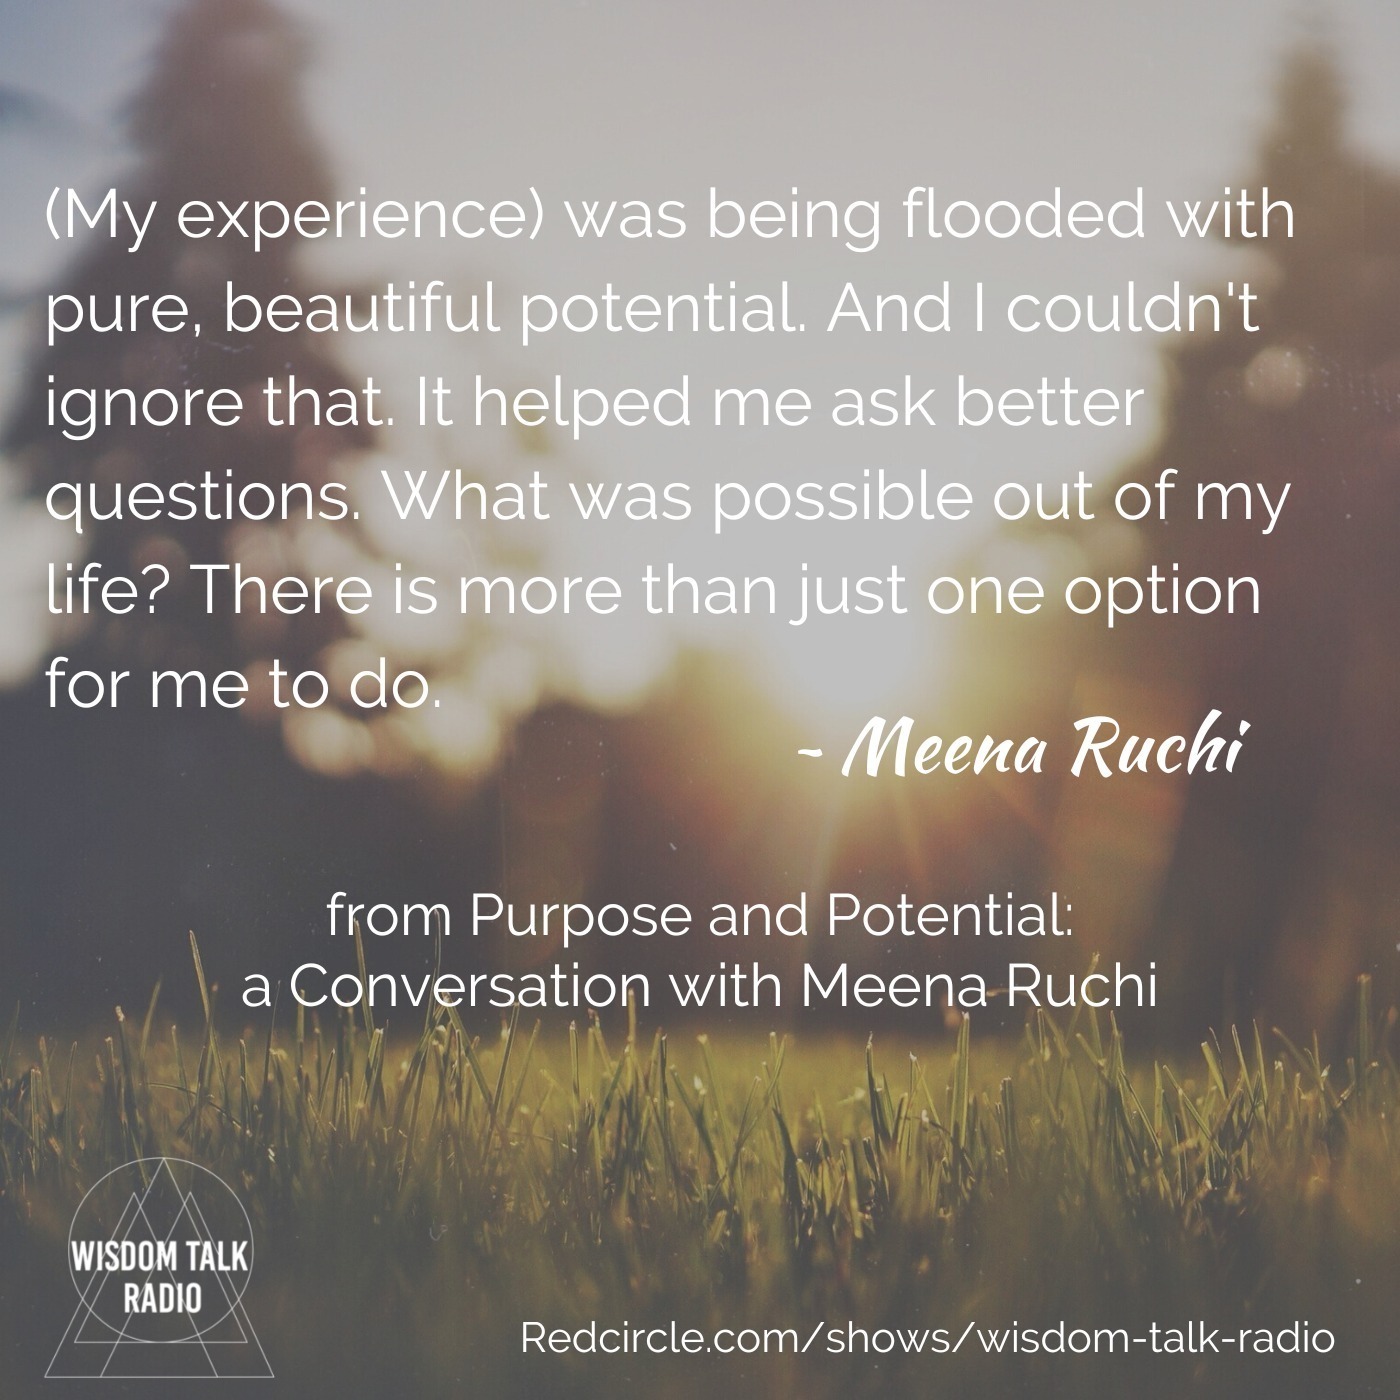 Purpose and Potential: a Conversation with Meena Ruchi